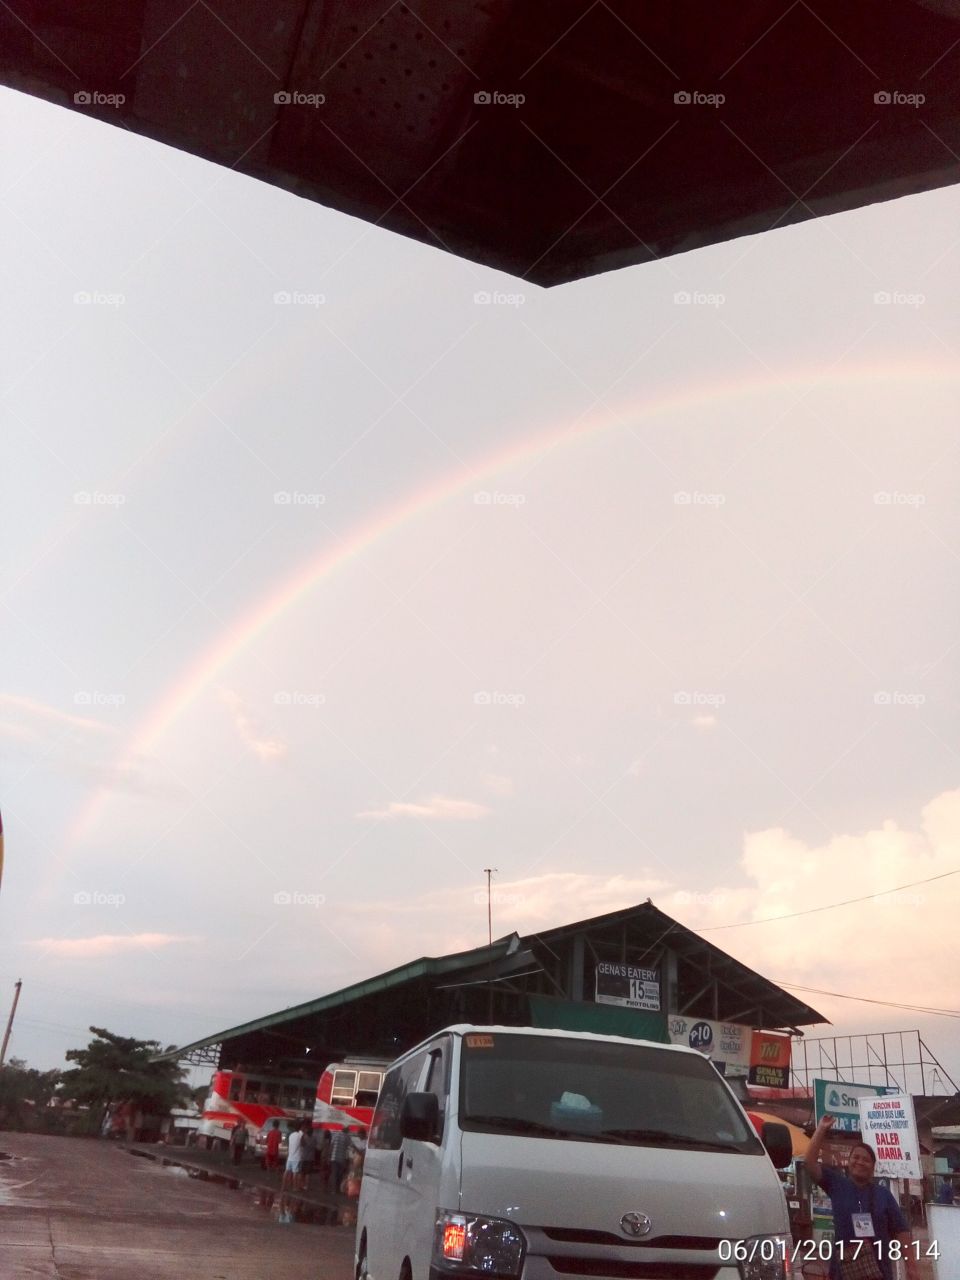 The rainbow of the Lord's promise